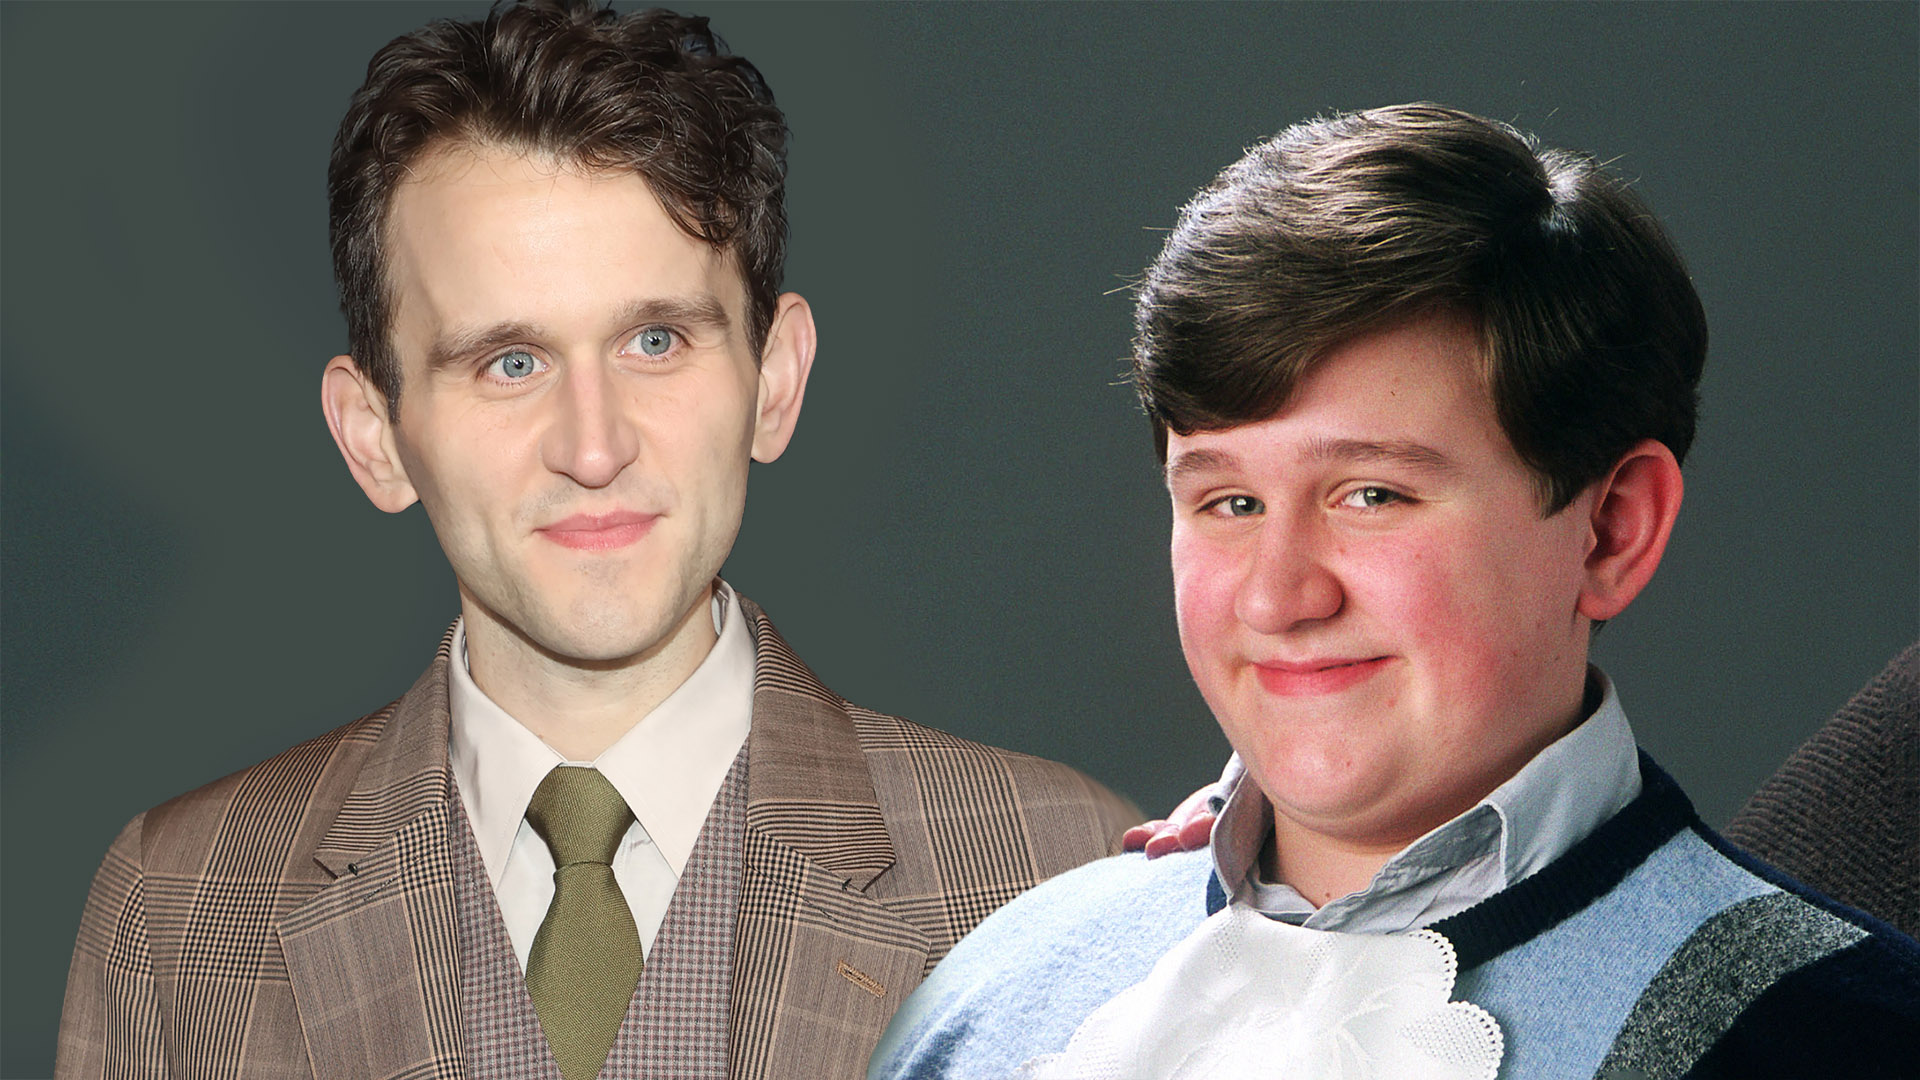 Could You Imagine Another Dudley? The Harry Potter Recast That Almost Happened